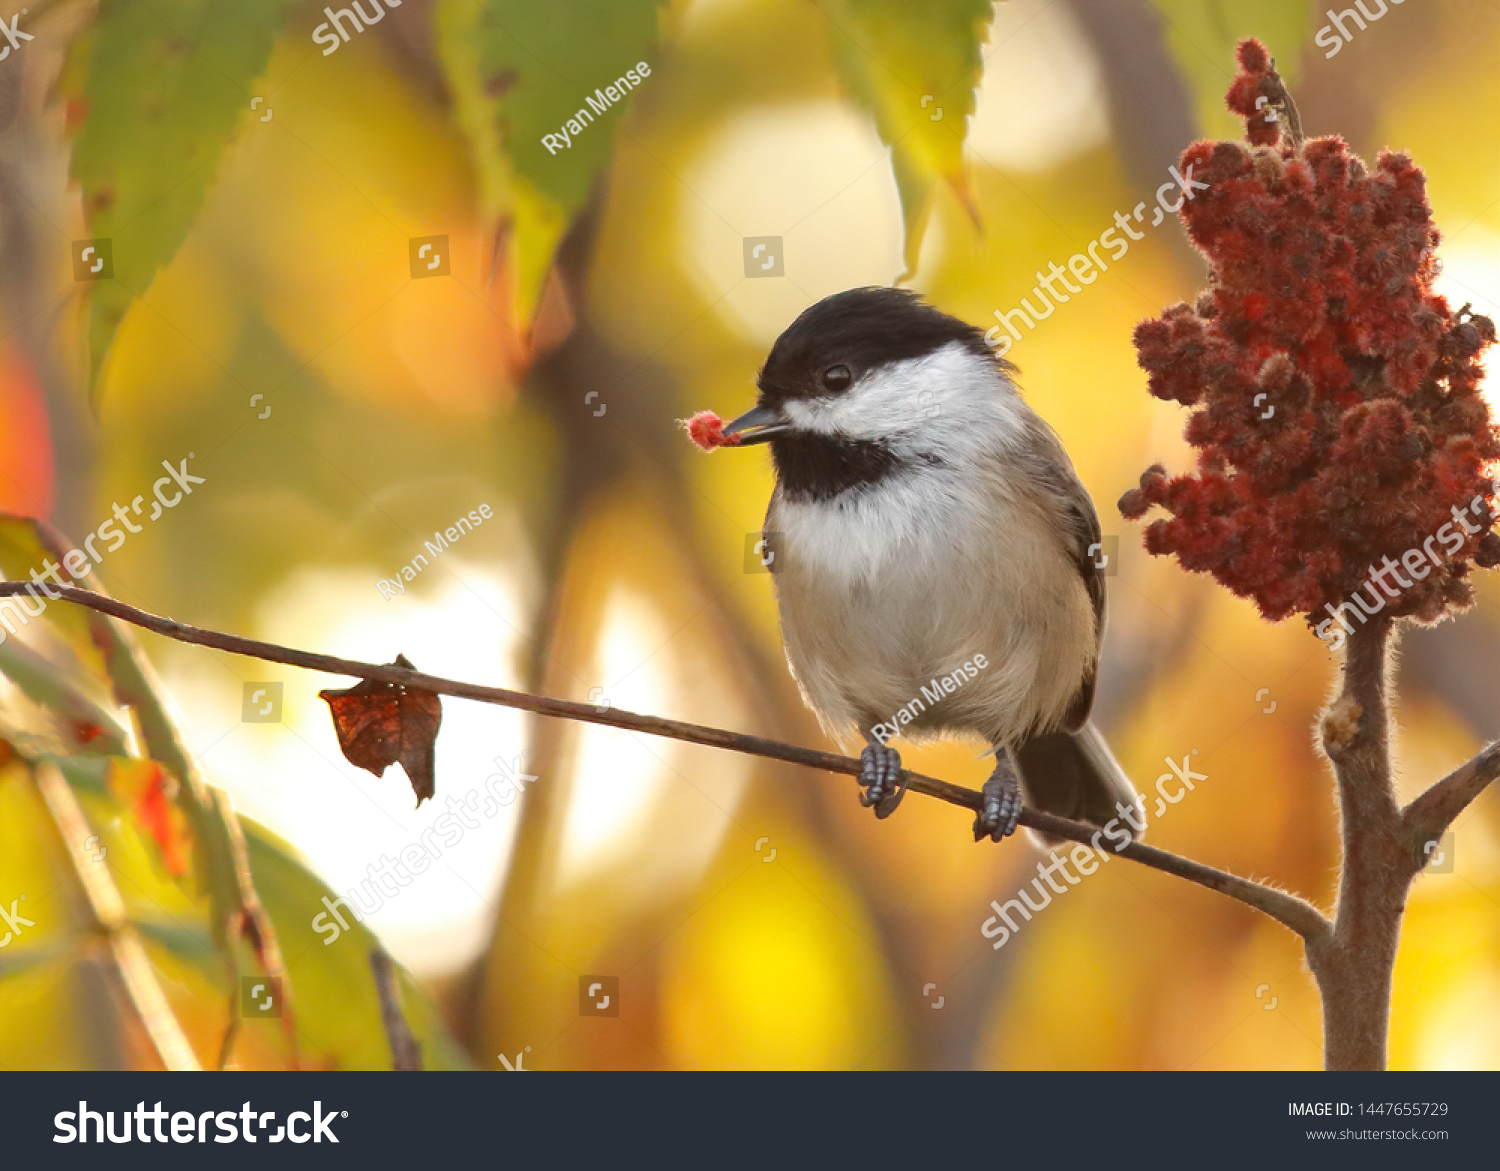 Black-capped Chickadee perched on Sumac while feeding on red berry with glowing golden background. #1447655729